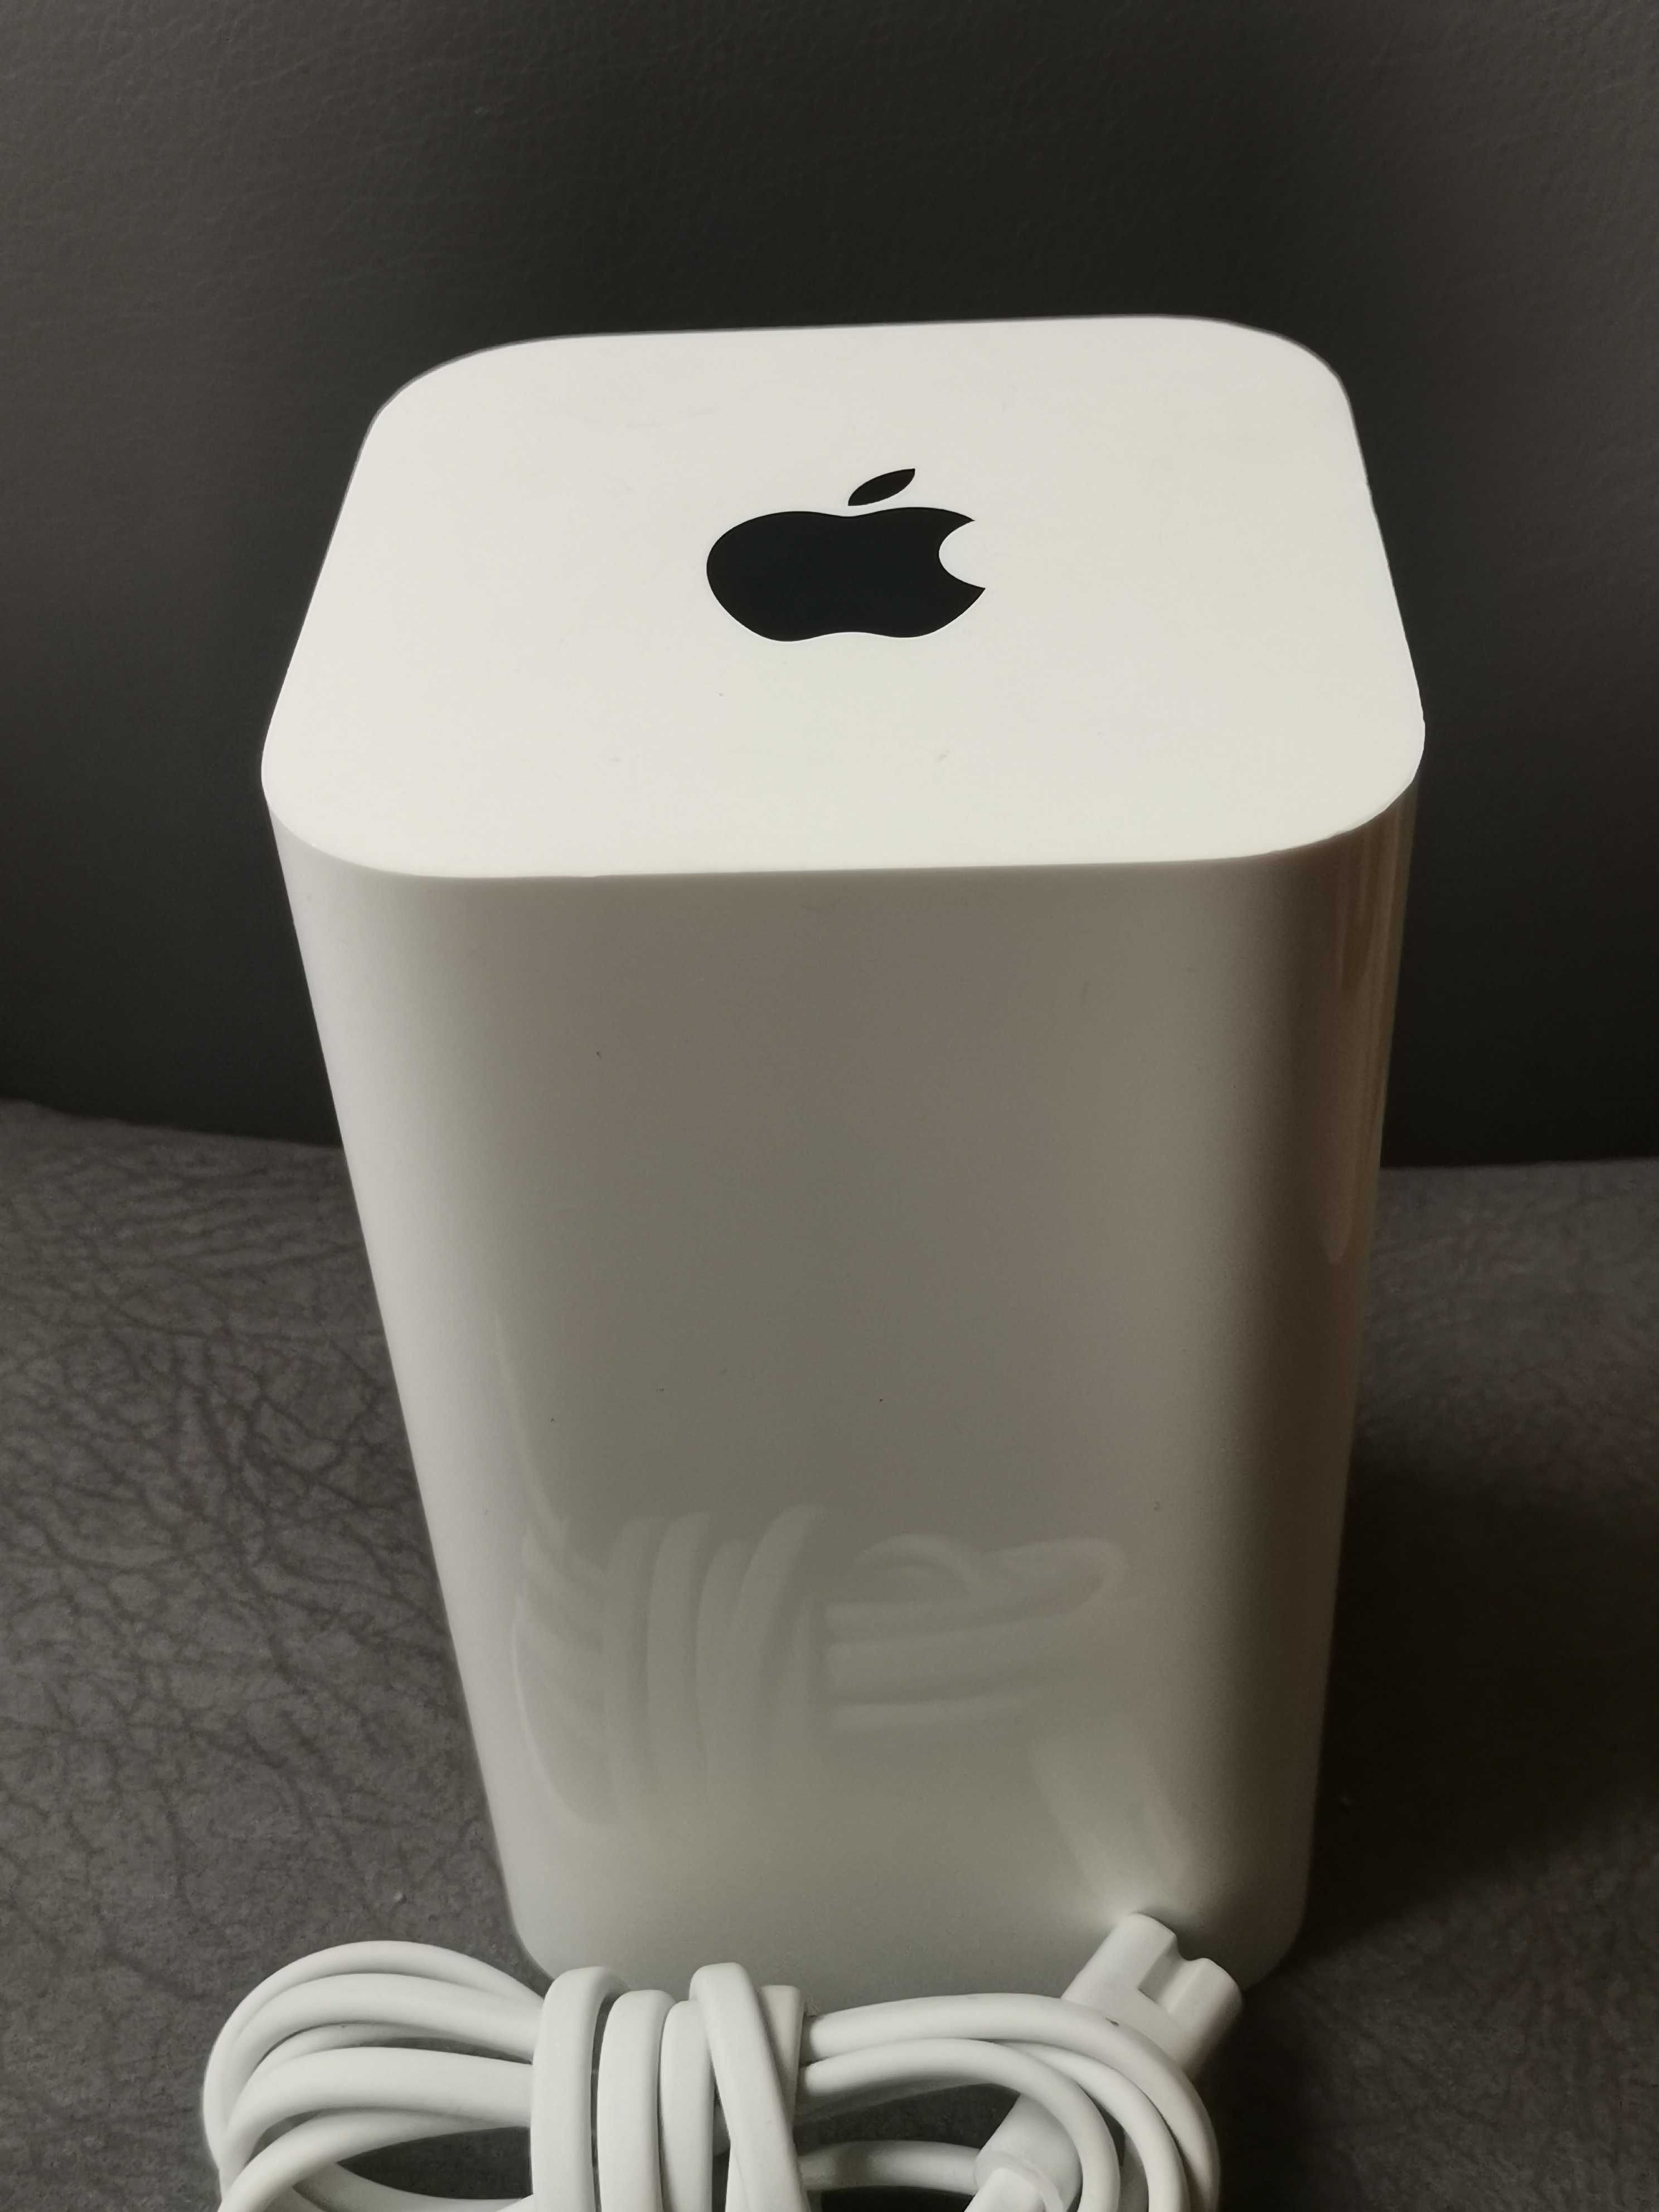 Router Apple Wireless Airport Extreme gen. 5 model A1521 fuctional